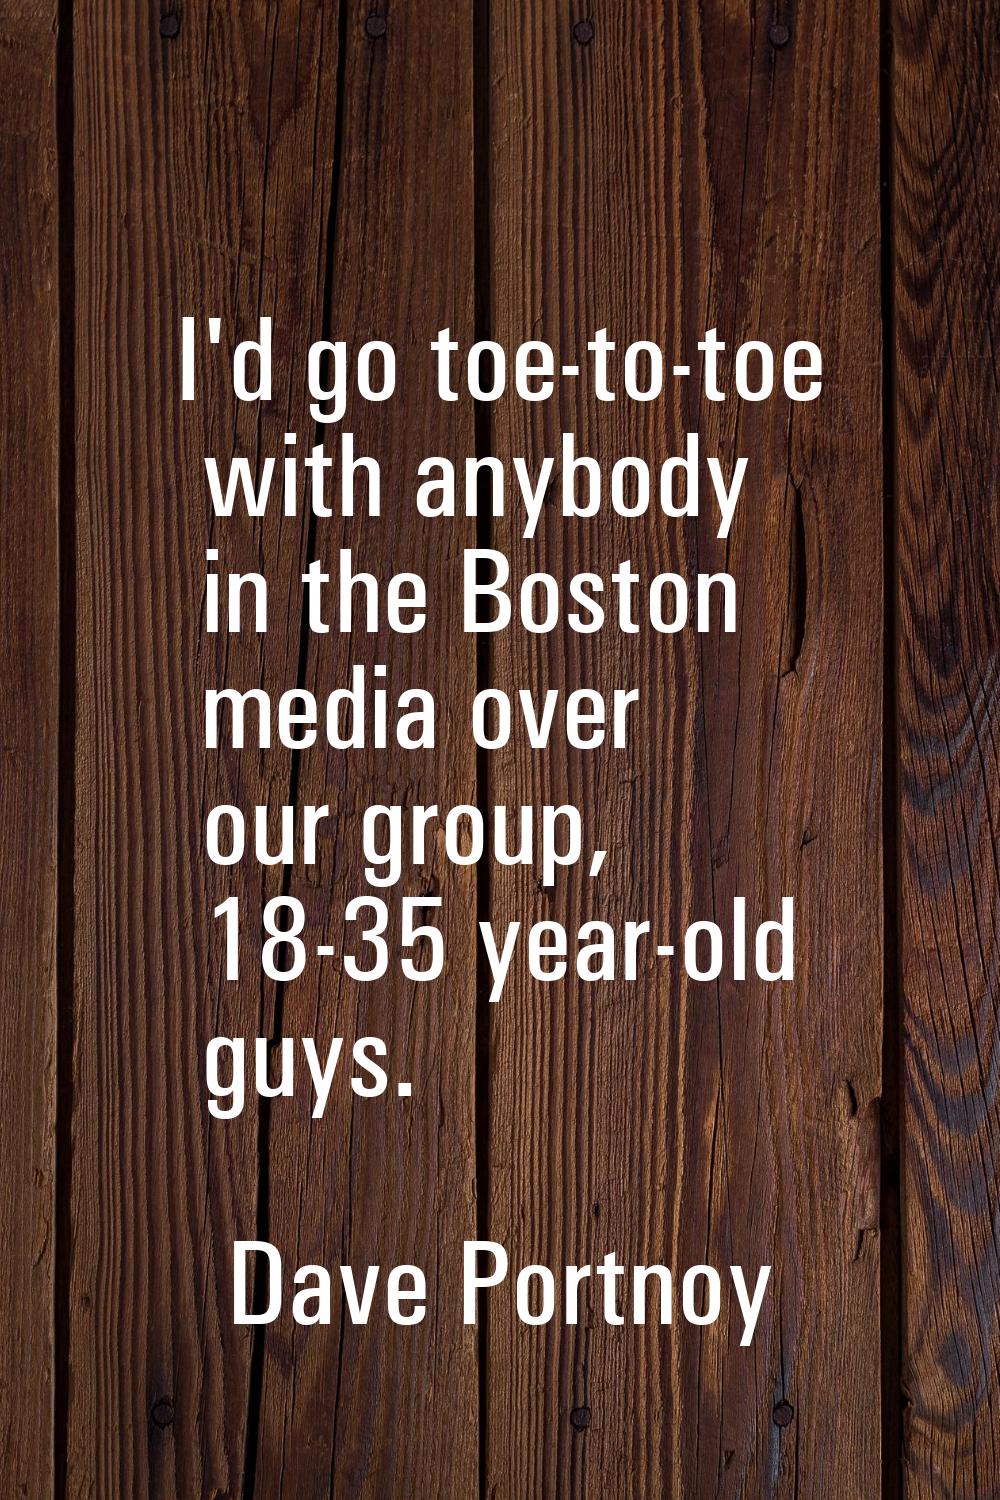 I'd go toe-to-toe with anybody in the Boston media over our group, 18-35 year-old guys.